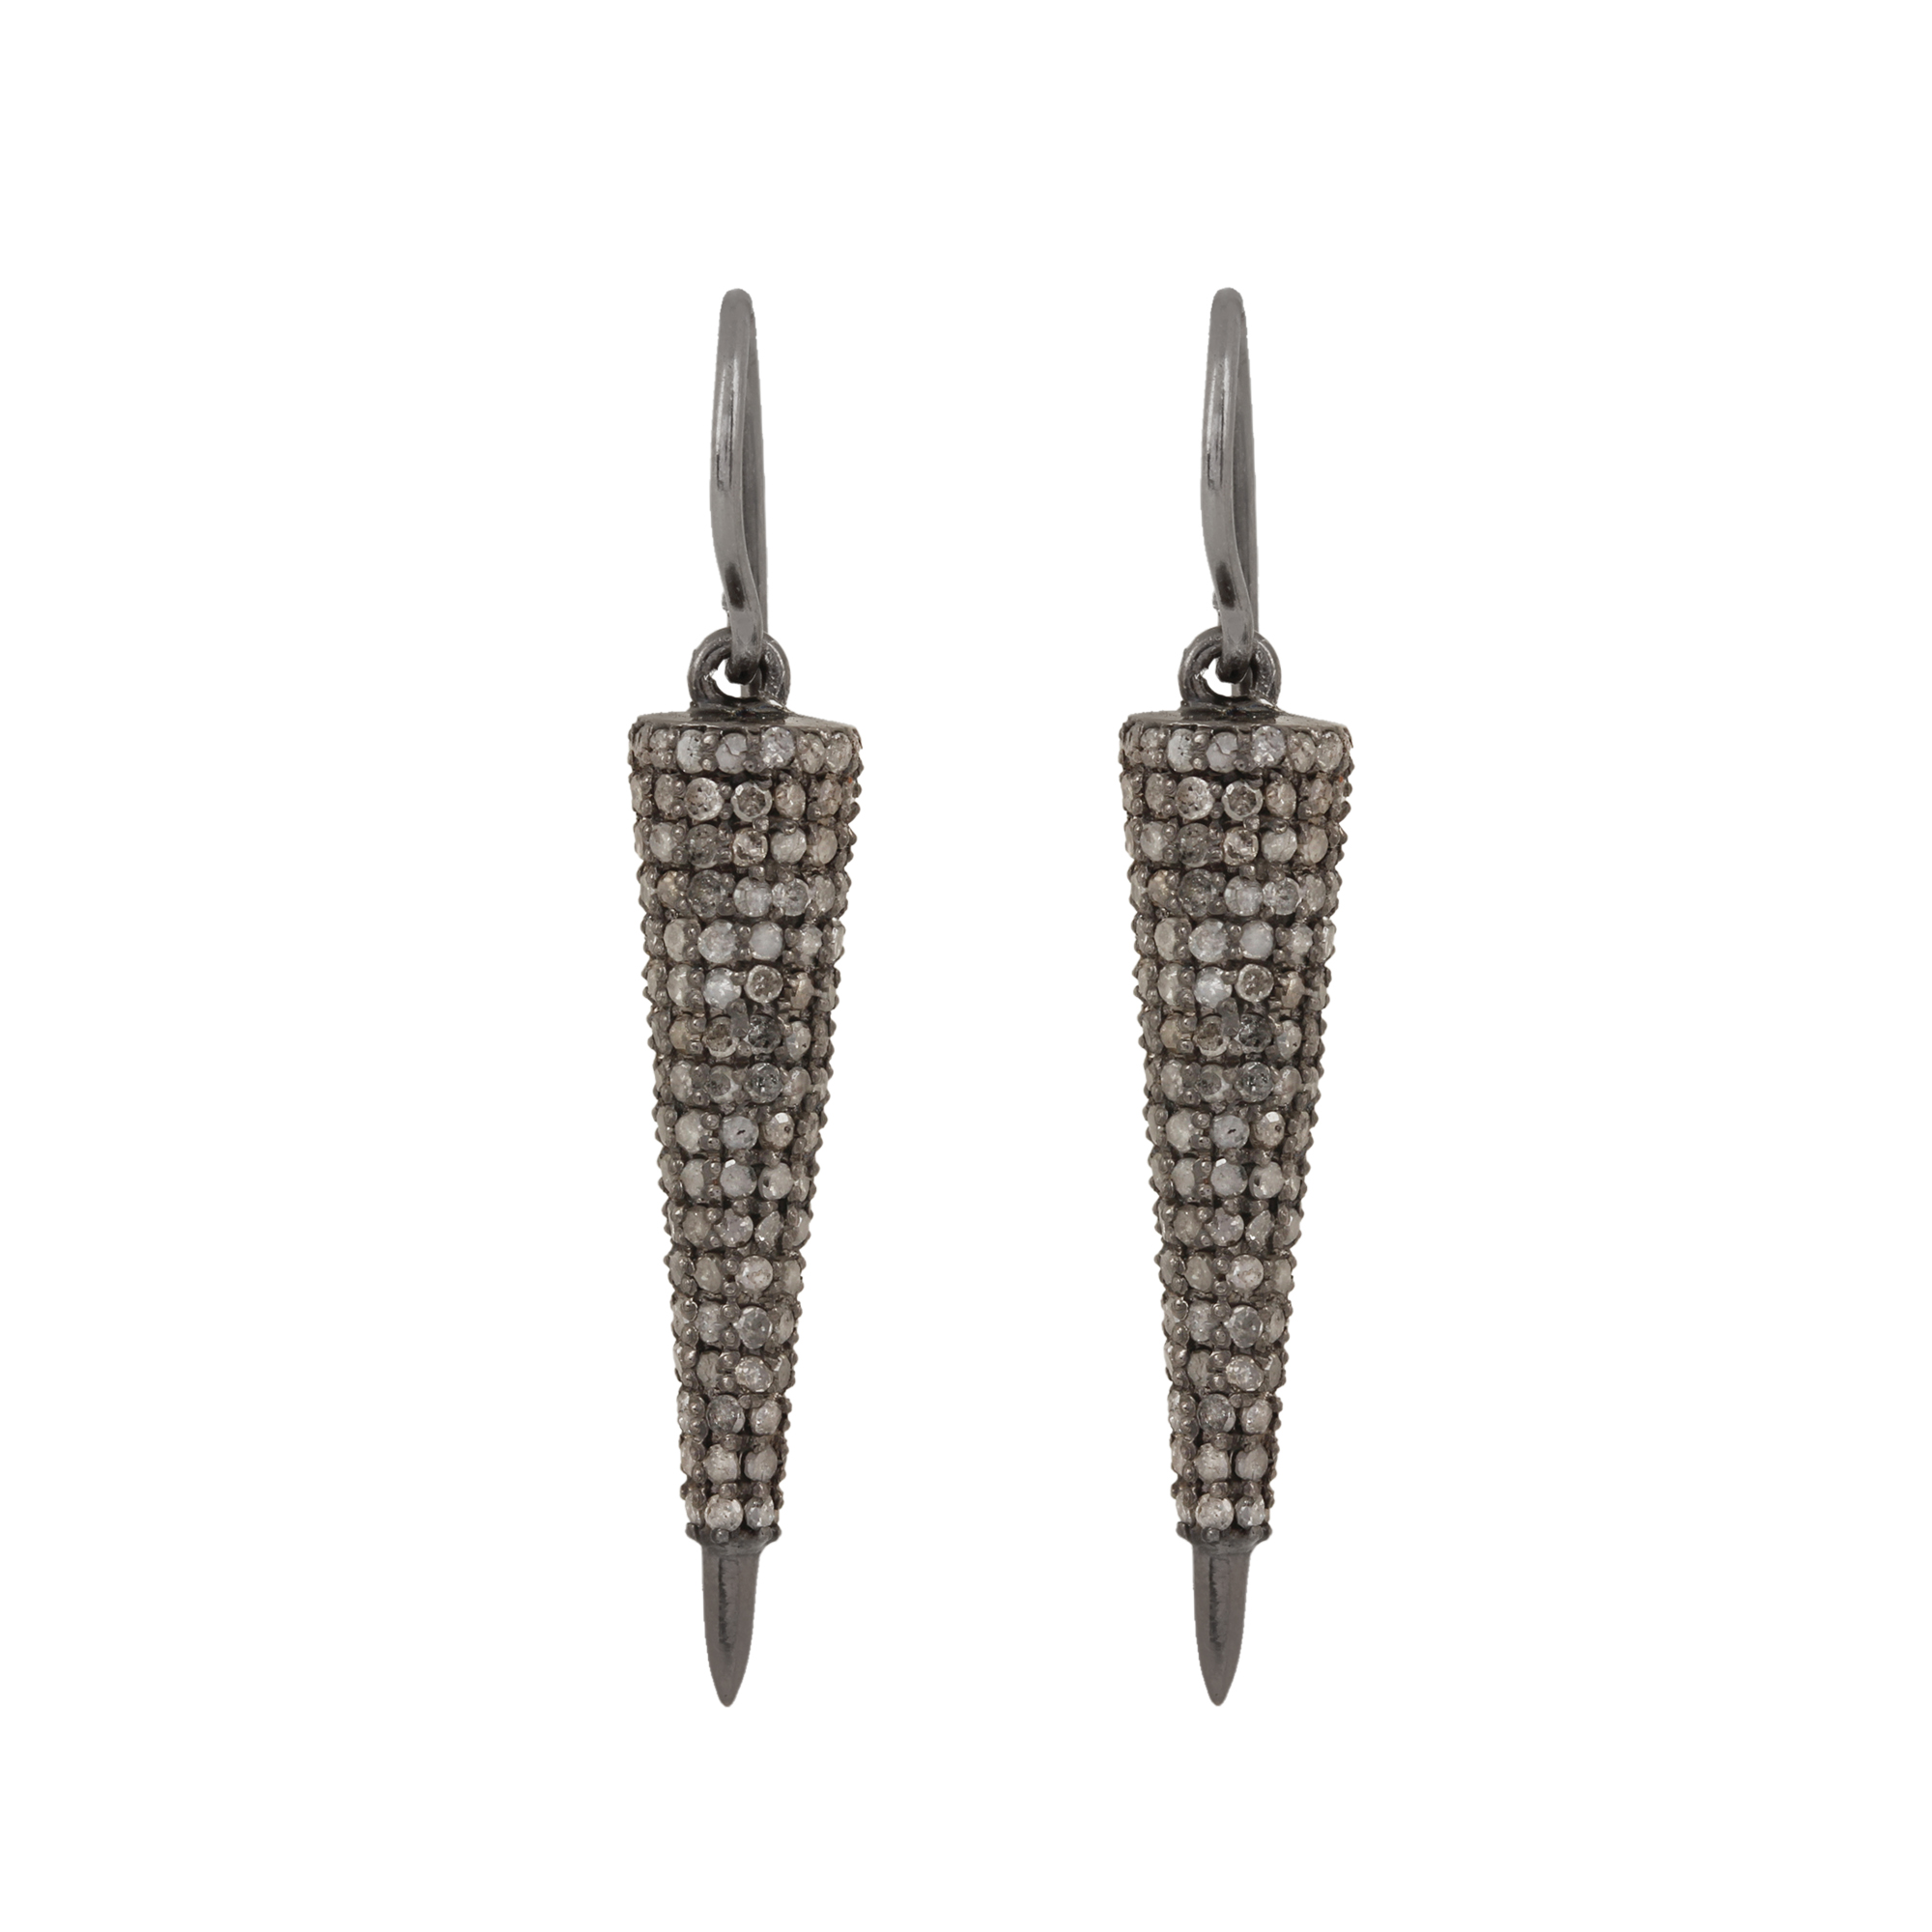 Natural diamond hook earrings made in 925 sterling silver jewelry